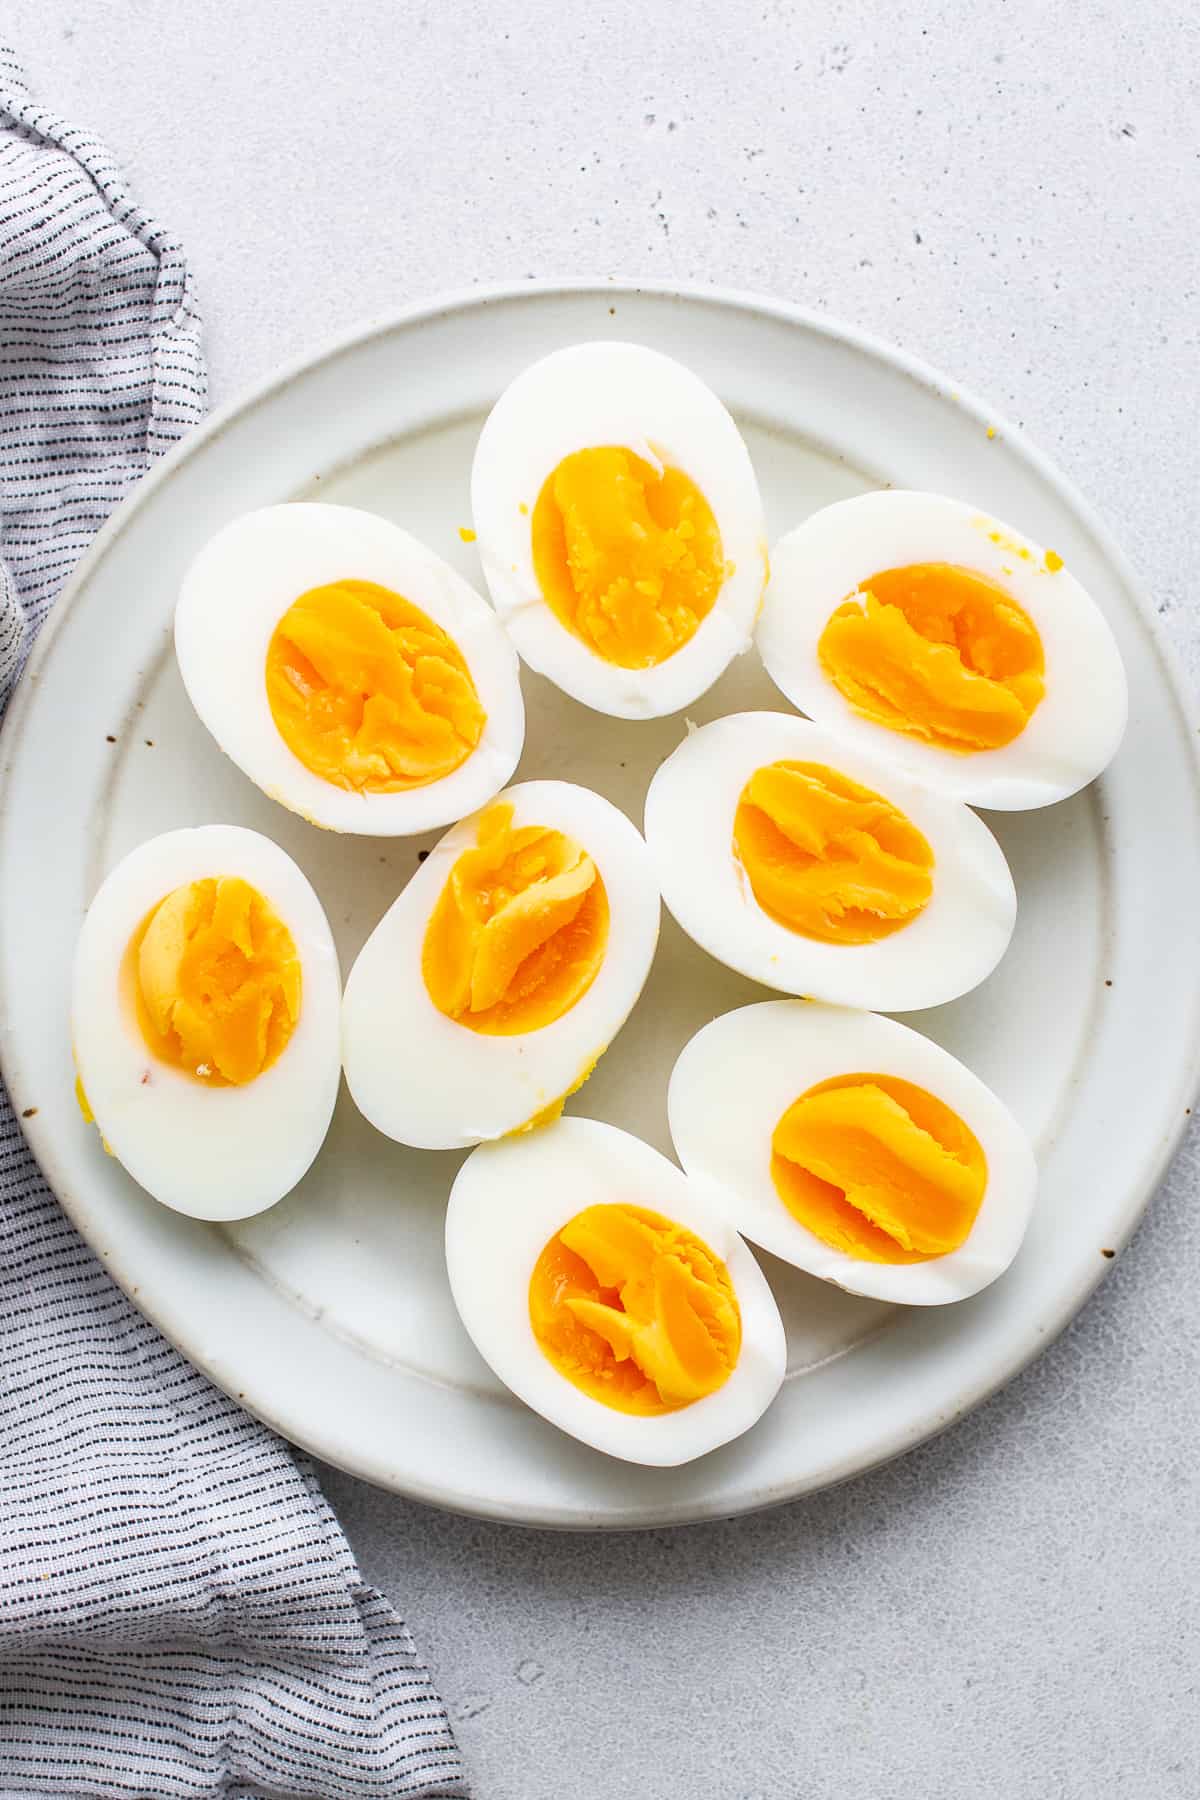 Hard boiled eggs cut in half on a plate.